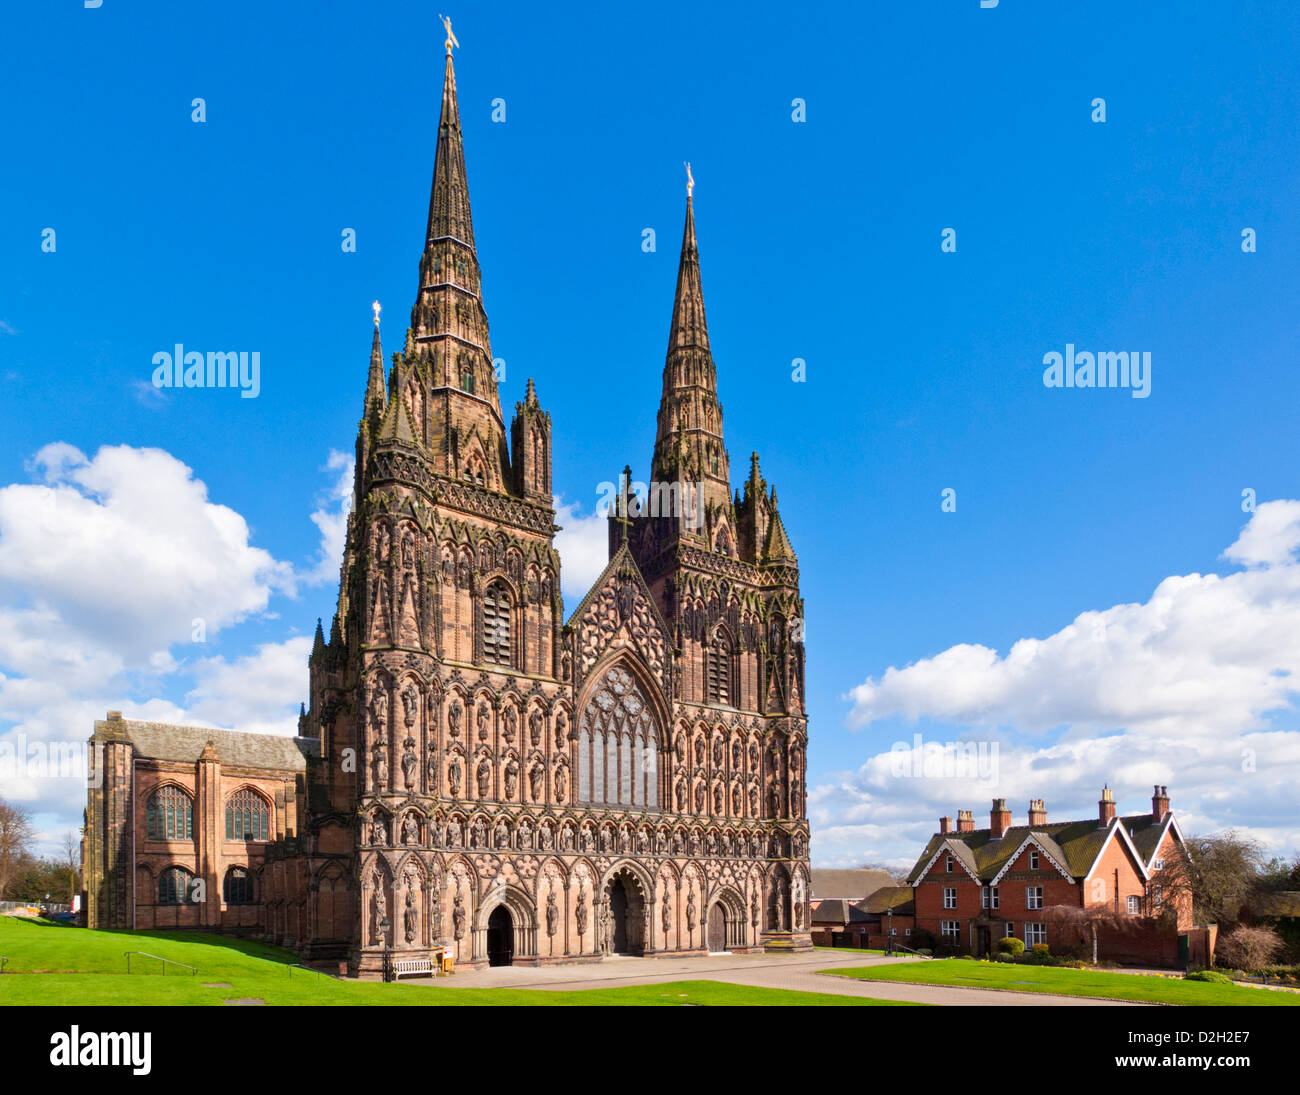 Lichfield cathedral west front with carvings St Chad and saxon and norman kings Staffordshire England UK GB EU Europe Stock Photo